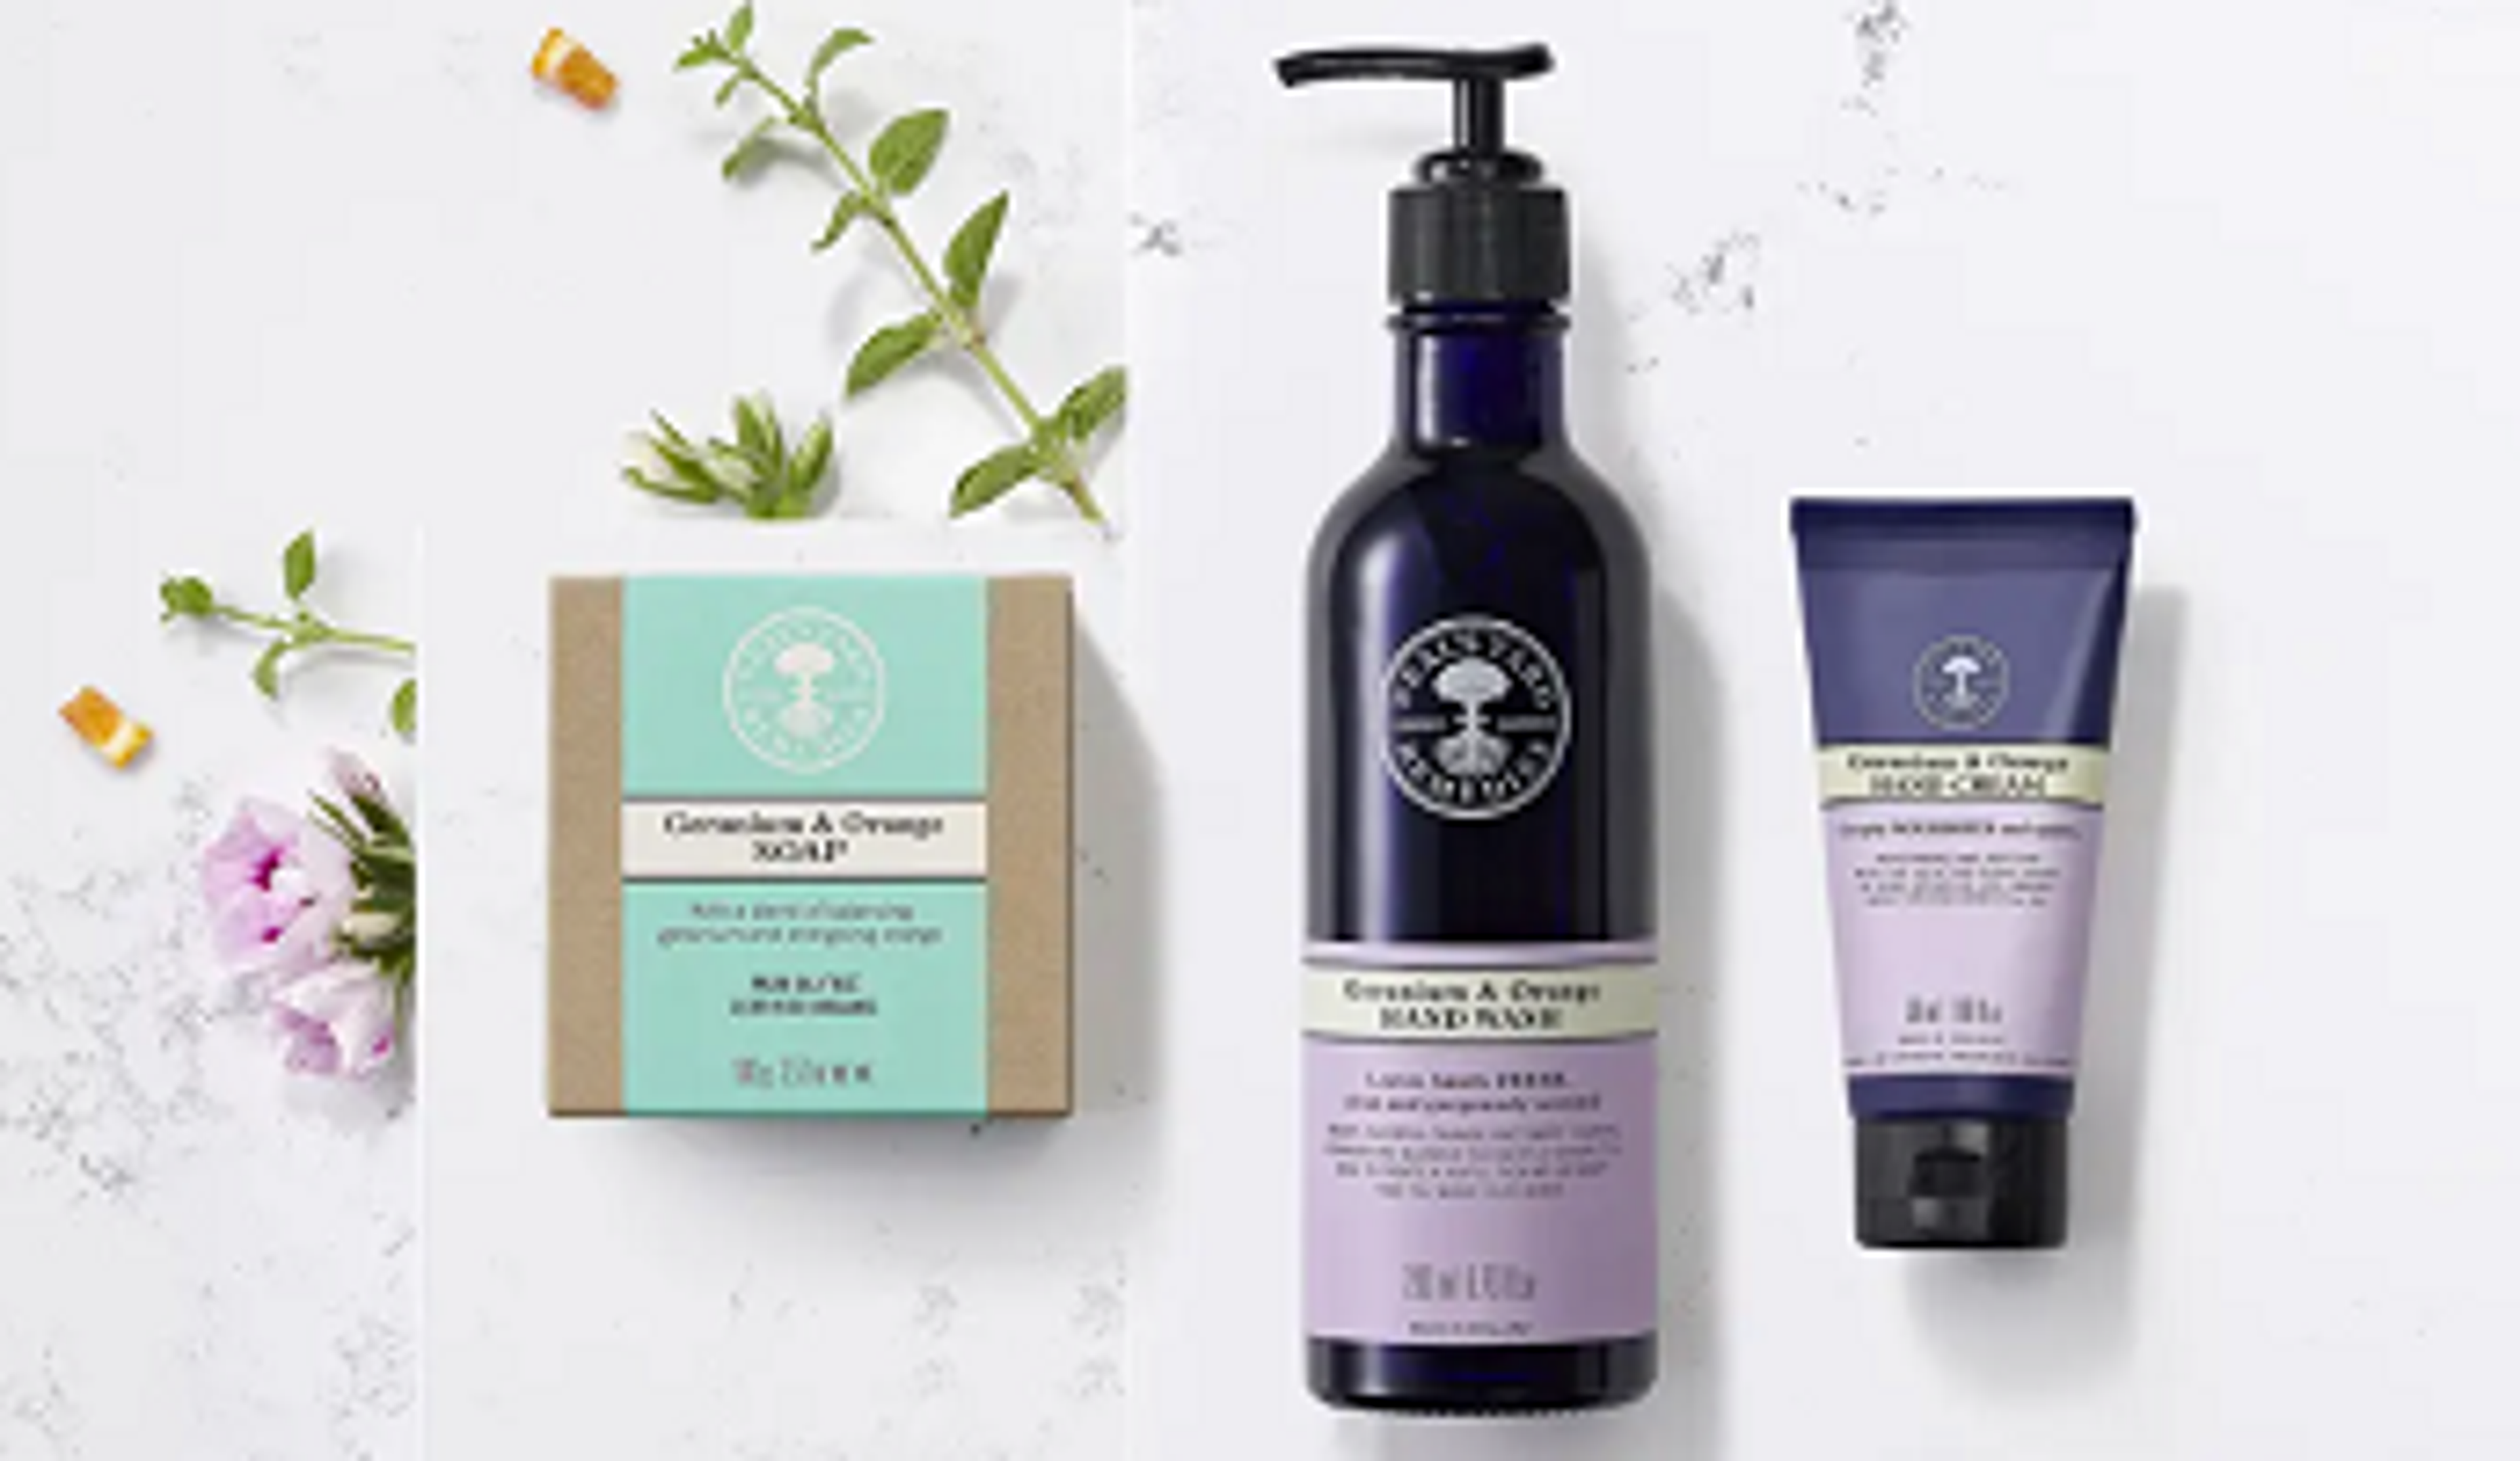  Selection of Hand Washes and Soaps from Neal's Yard Remedies with flowers 